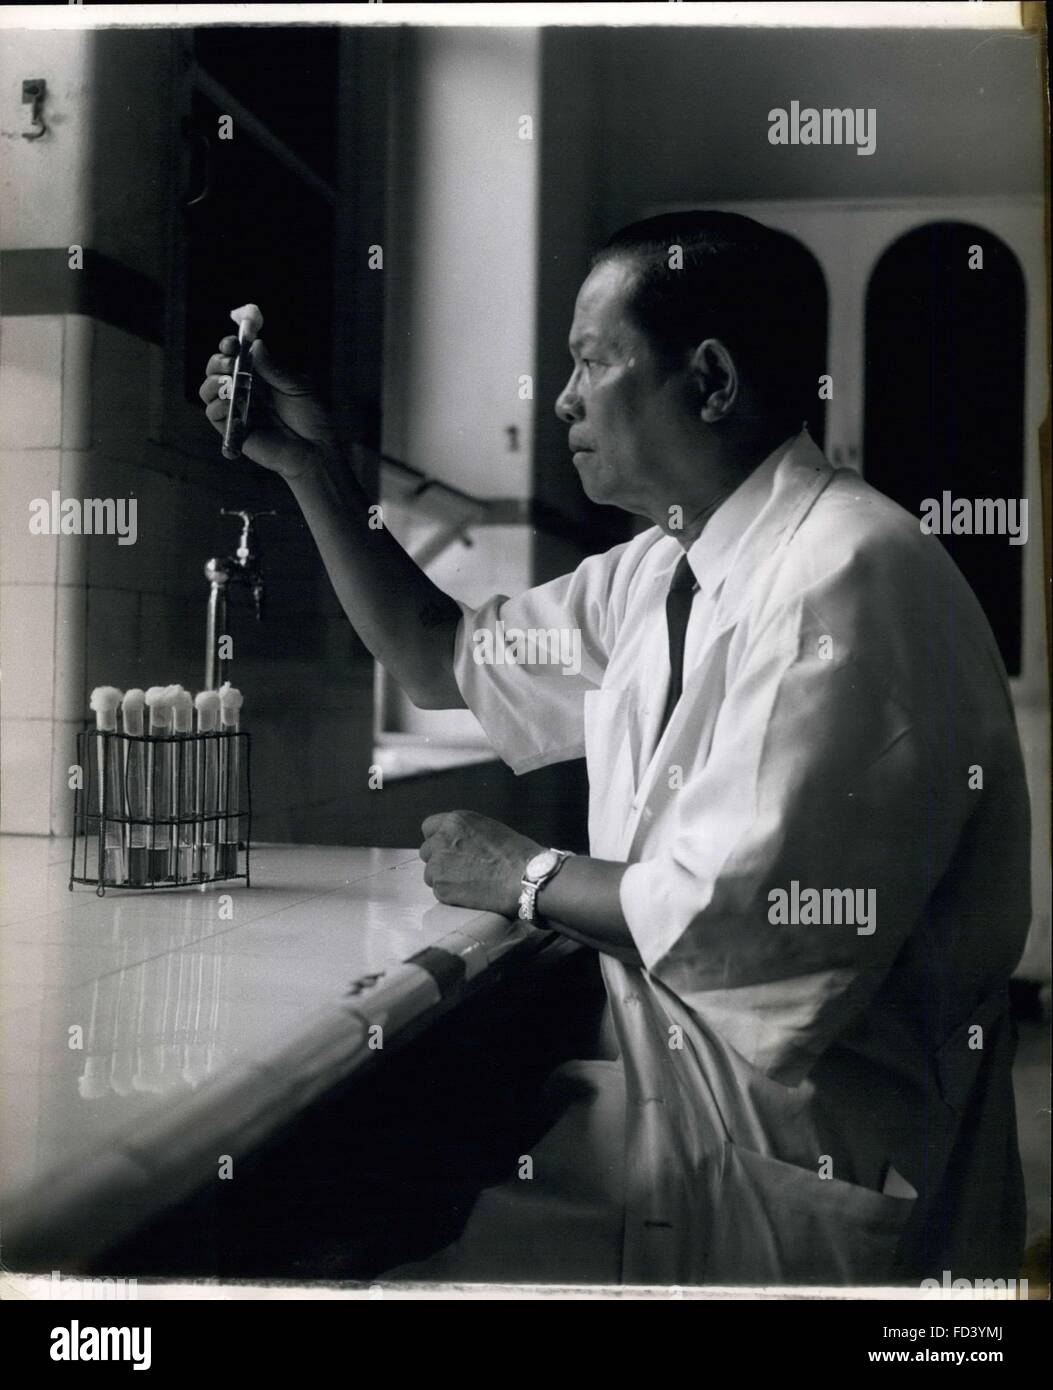 1962 - Work of the Pasteur Institute in Bangkok.: A Thai doctor in charge of the anti-snake bit serum at the Institute, examines the distilled poison of six different deadly snakes. This treated poison will now be injected into a horse, and allowed to remain for some weeks. Later the blood is taken from the horse and the anti-venom serum will be crystallised and bottled ready for use. © Keystone Pictures USA/ZUMAPRESS.com/Alamy Live News Stock Photo